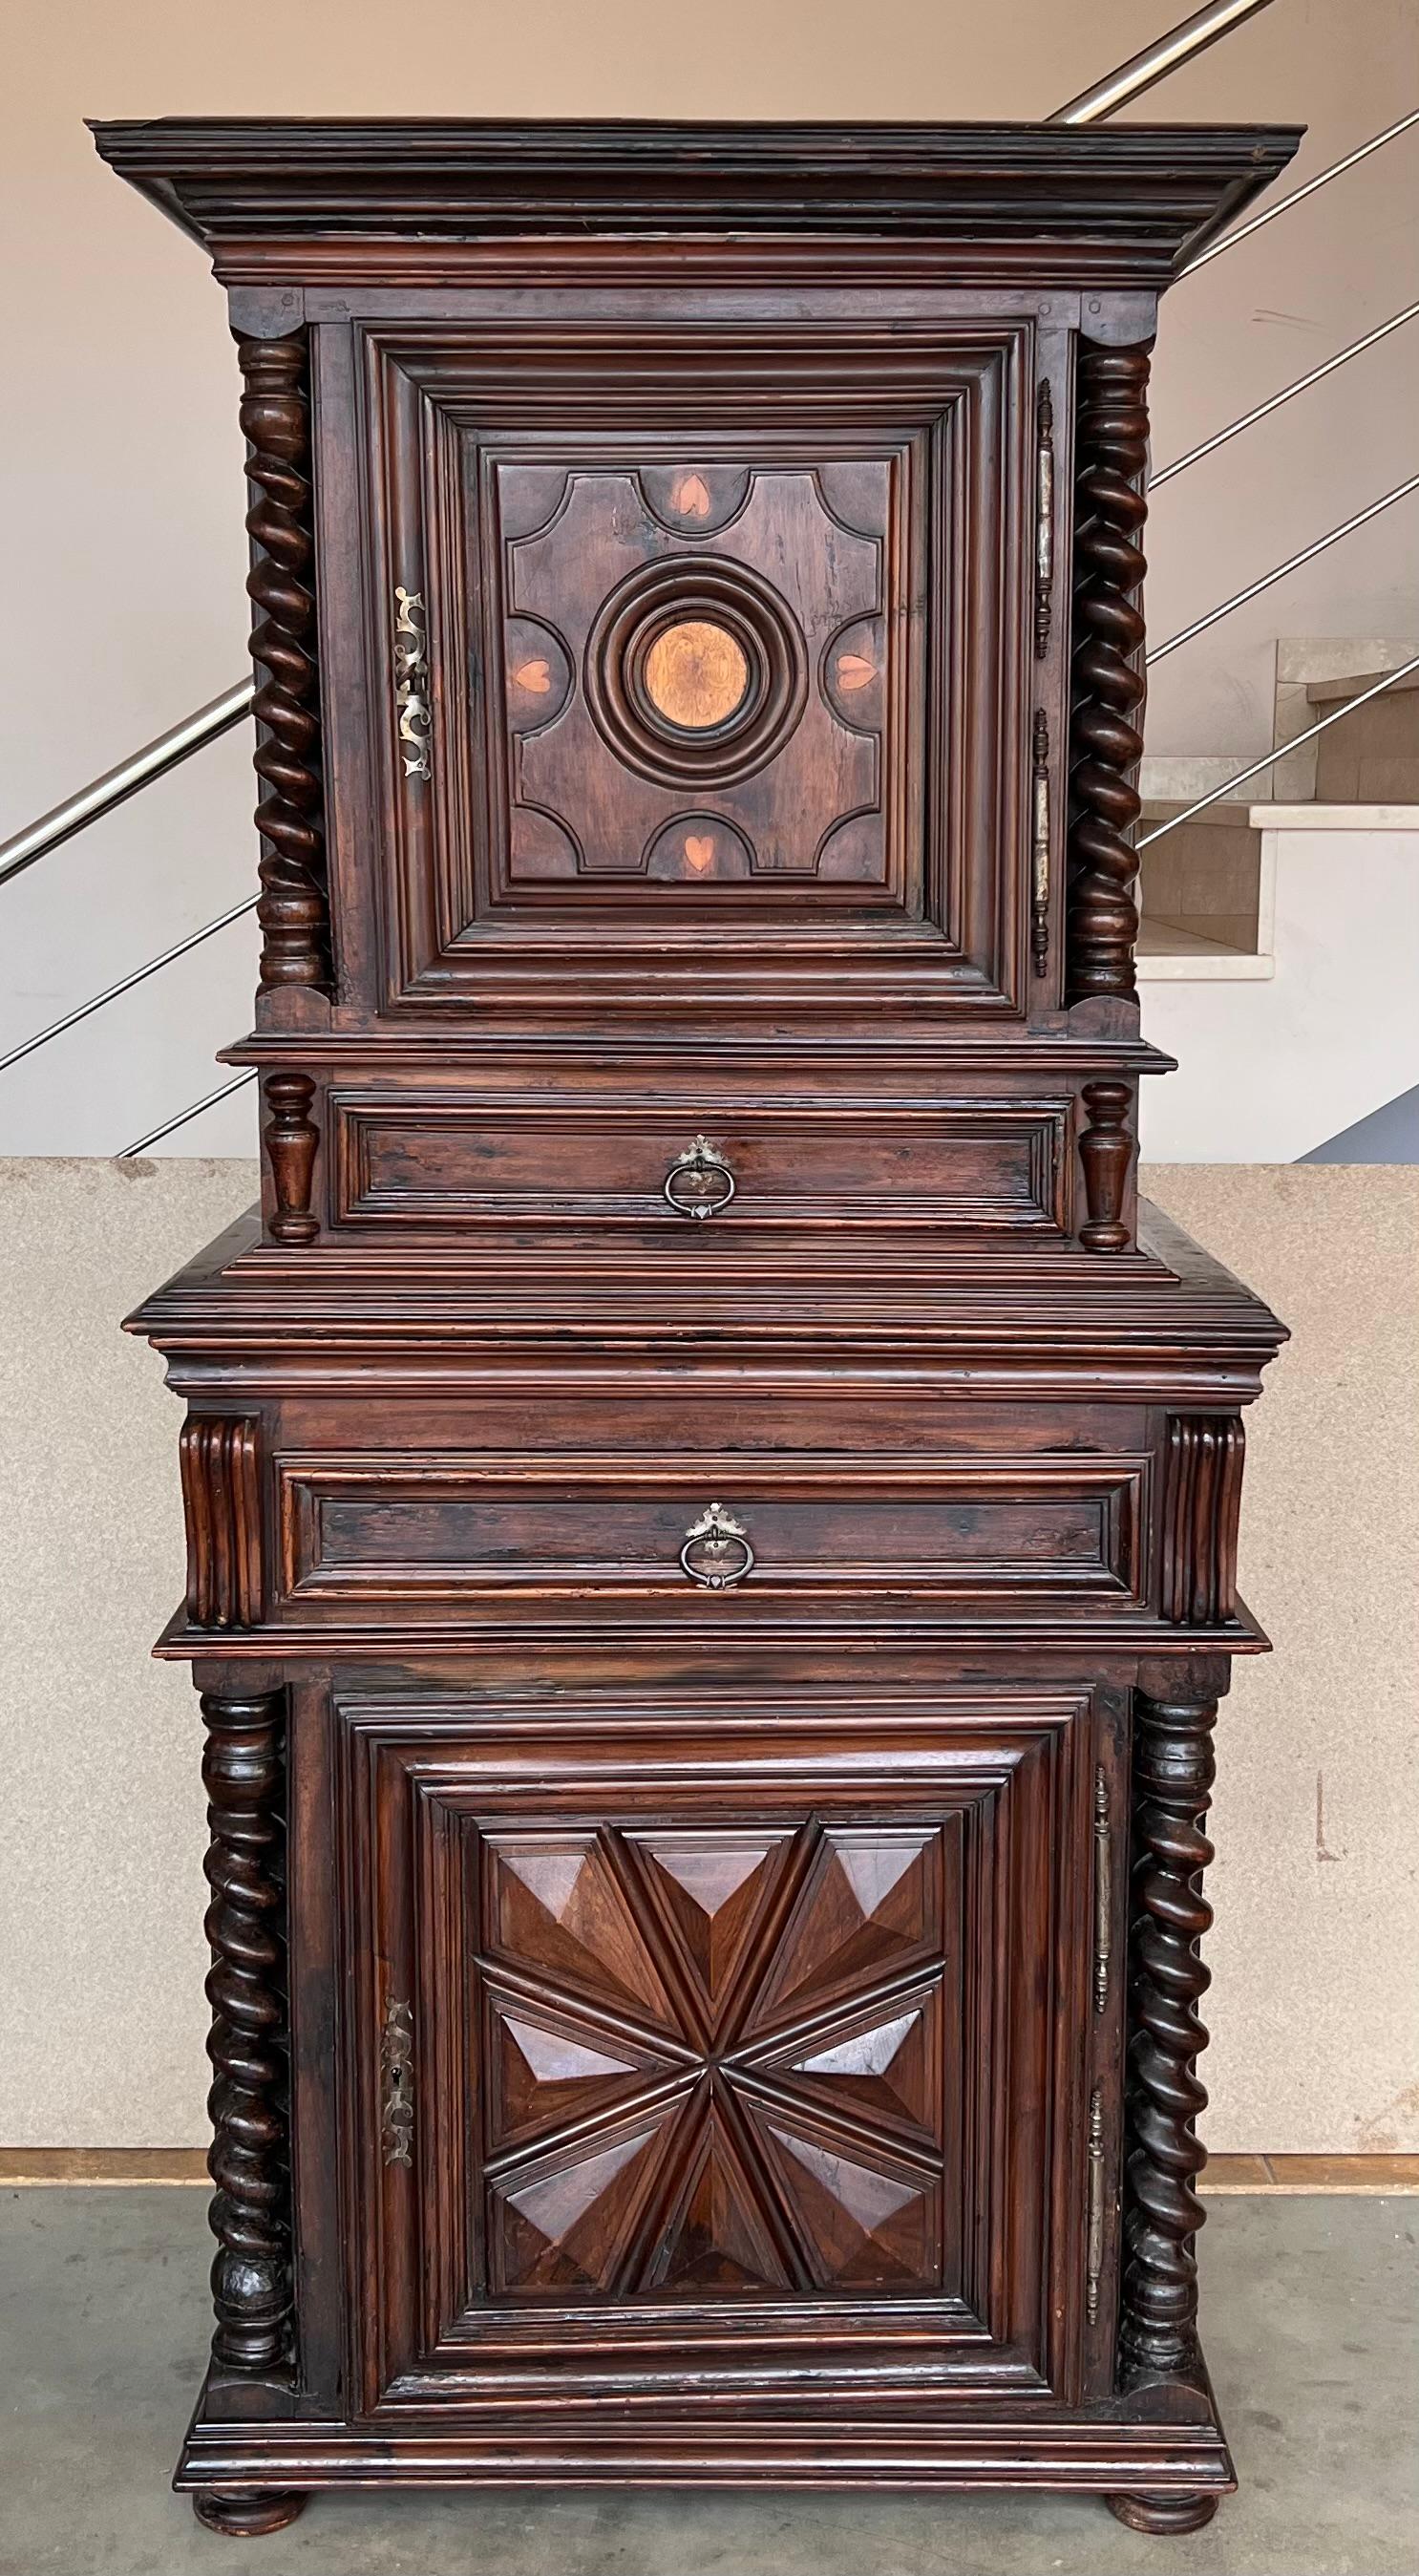 An exquisite Dutch cushion cabinet with two doors and two drawer. This cupboard takes its name from the pillow-shaped thickenings on the doors. The doors are flanked by semicircular ebony veneered columns. In the middle sits a curved drawer. 
This